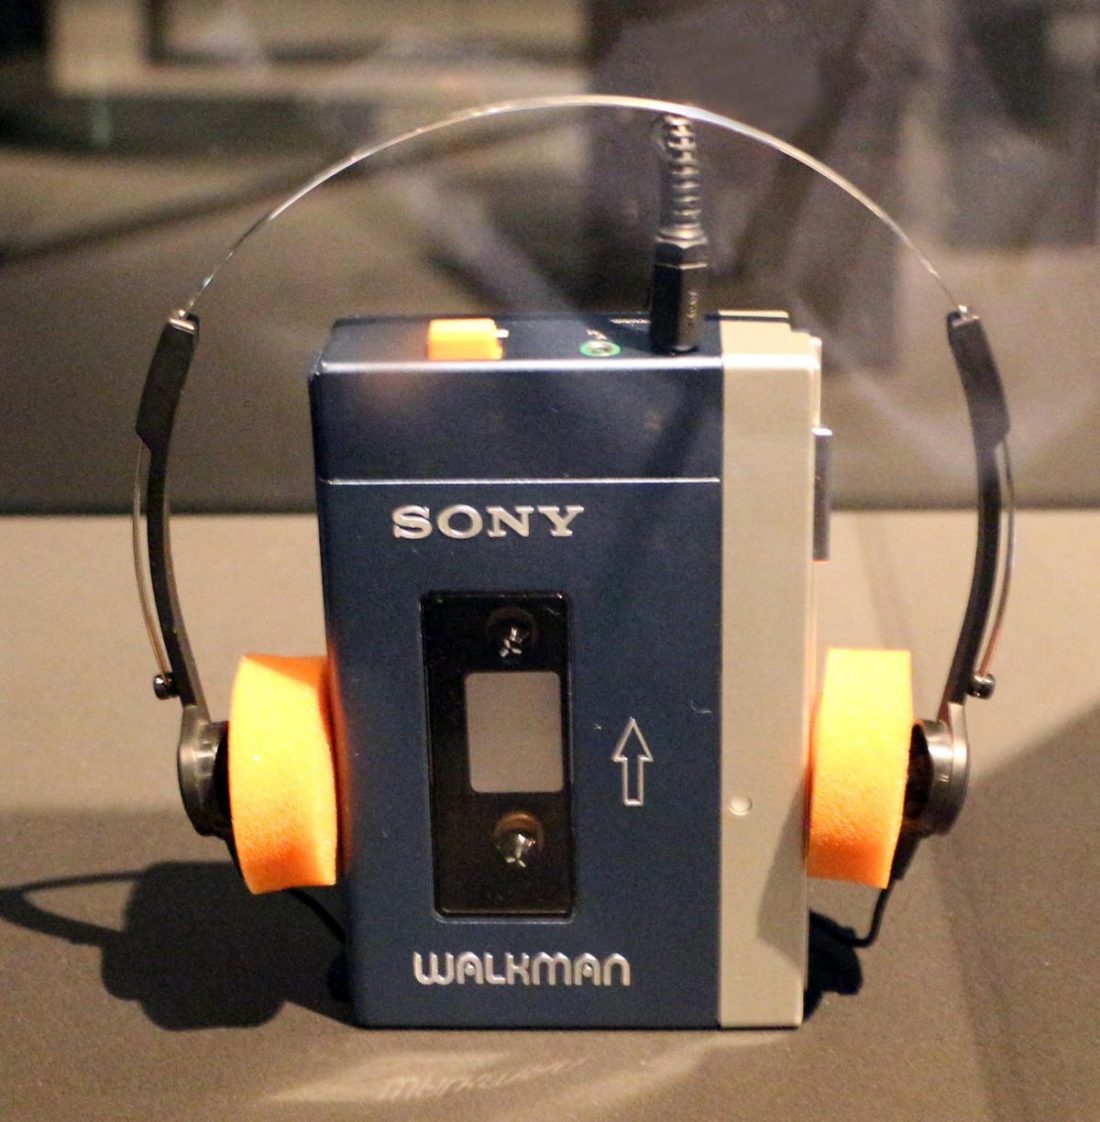 The Sony Walkman with MDR-3L2 Headphones (From: Sailko | https://commons.wikimedia.org/)